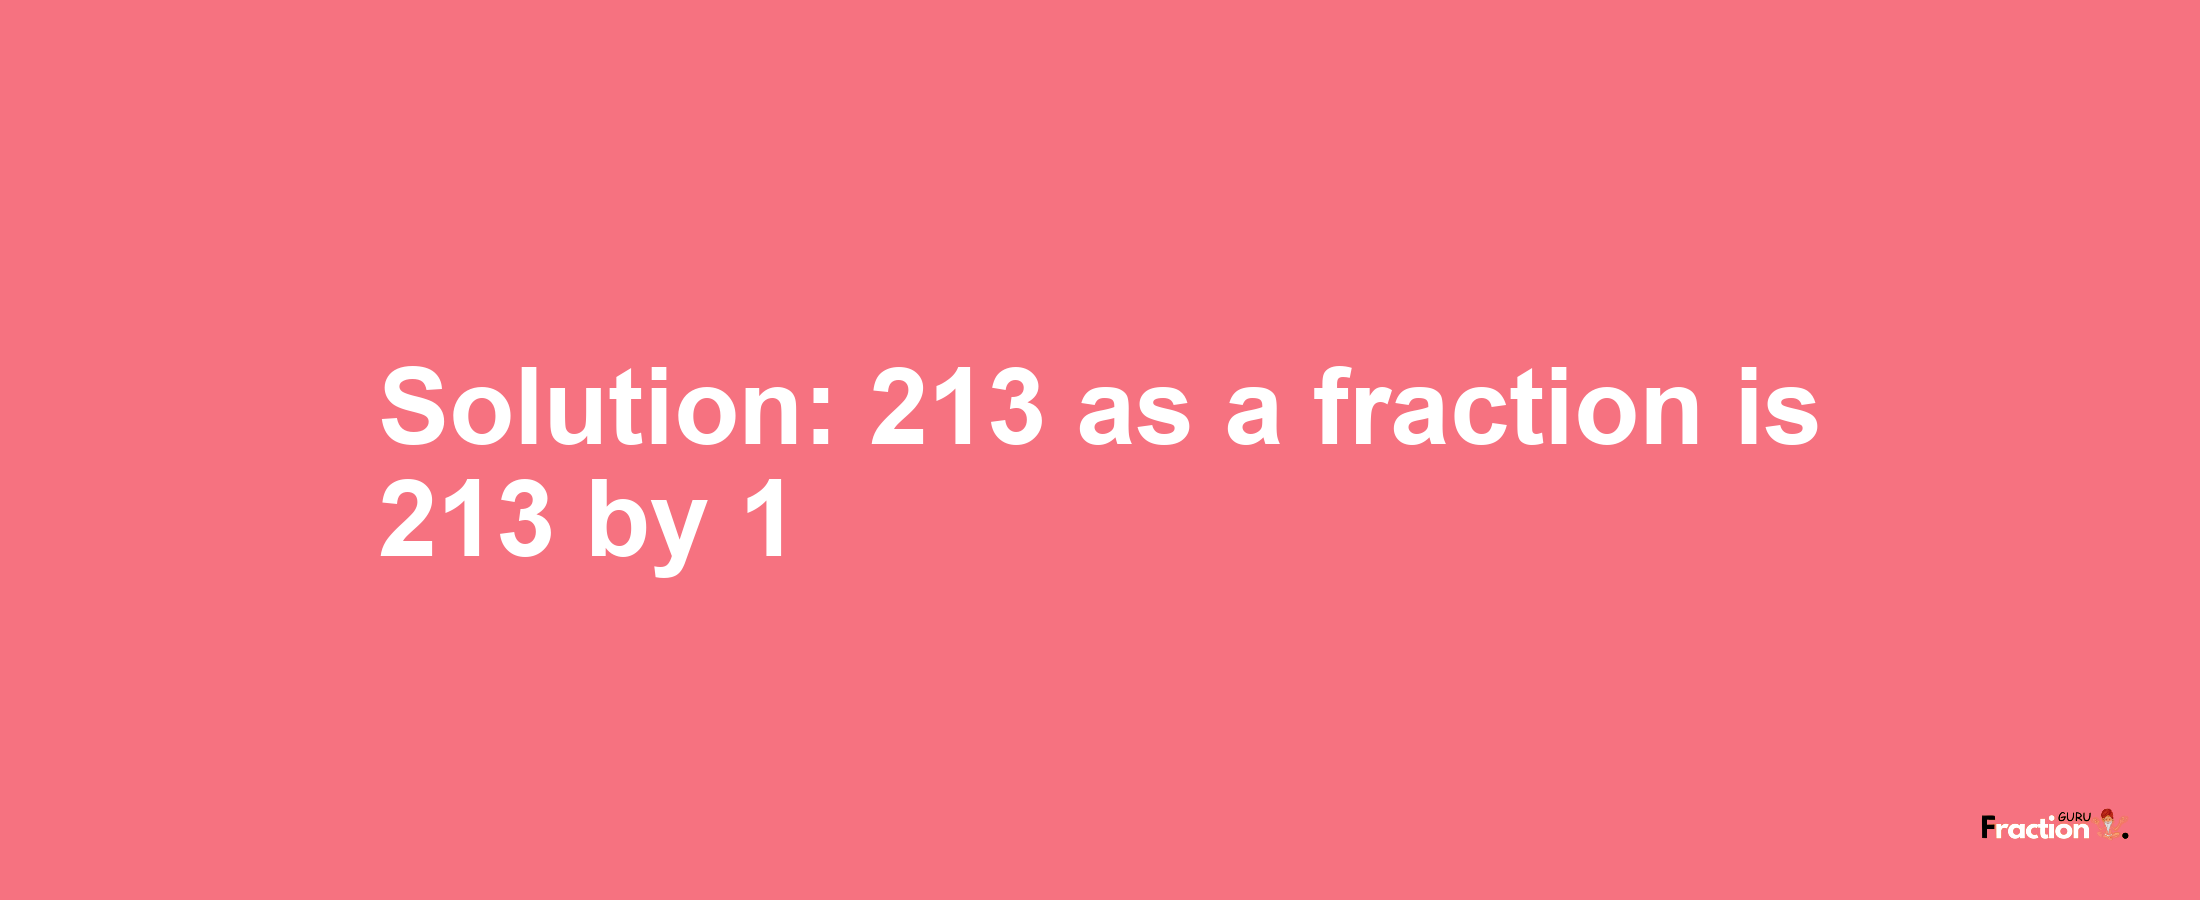 Solution:213 as a fraction is 213/1